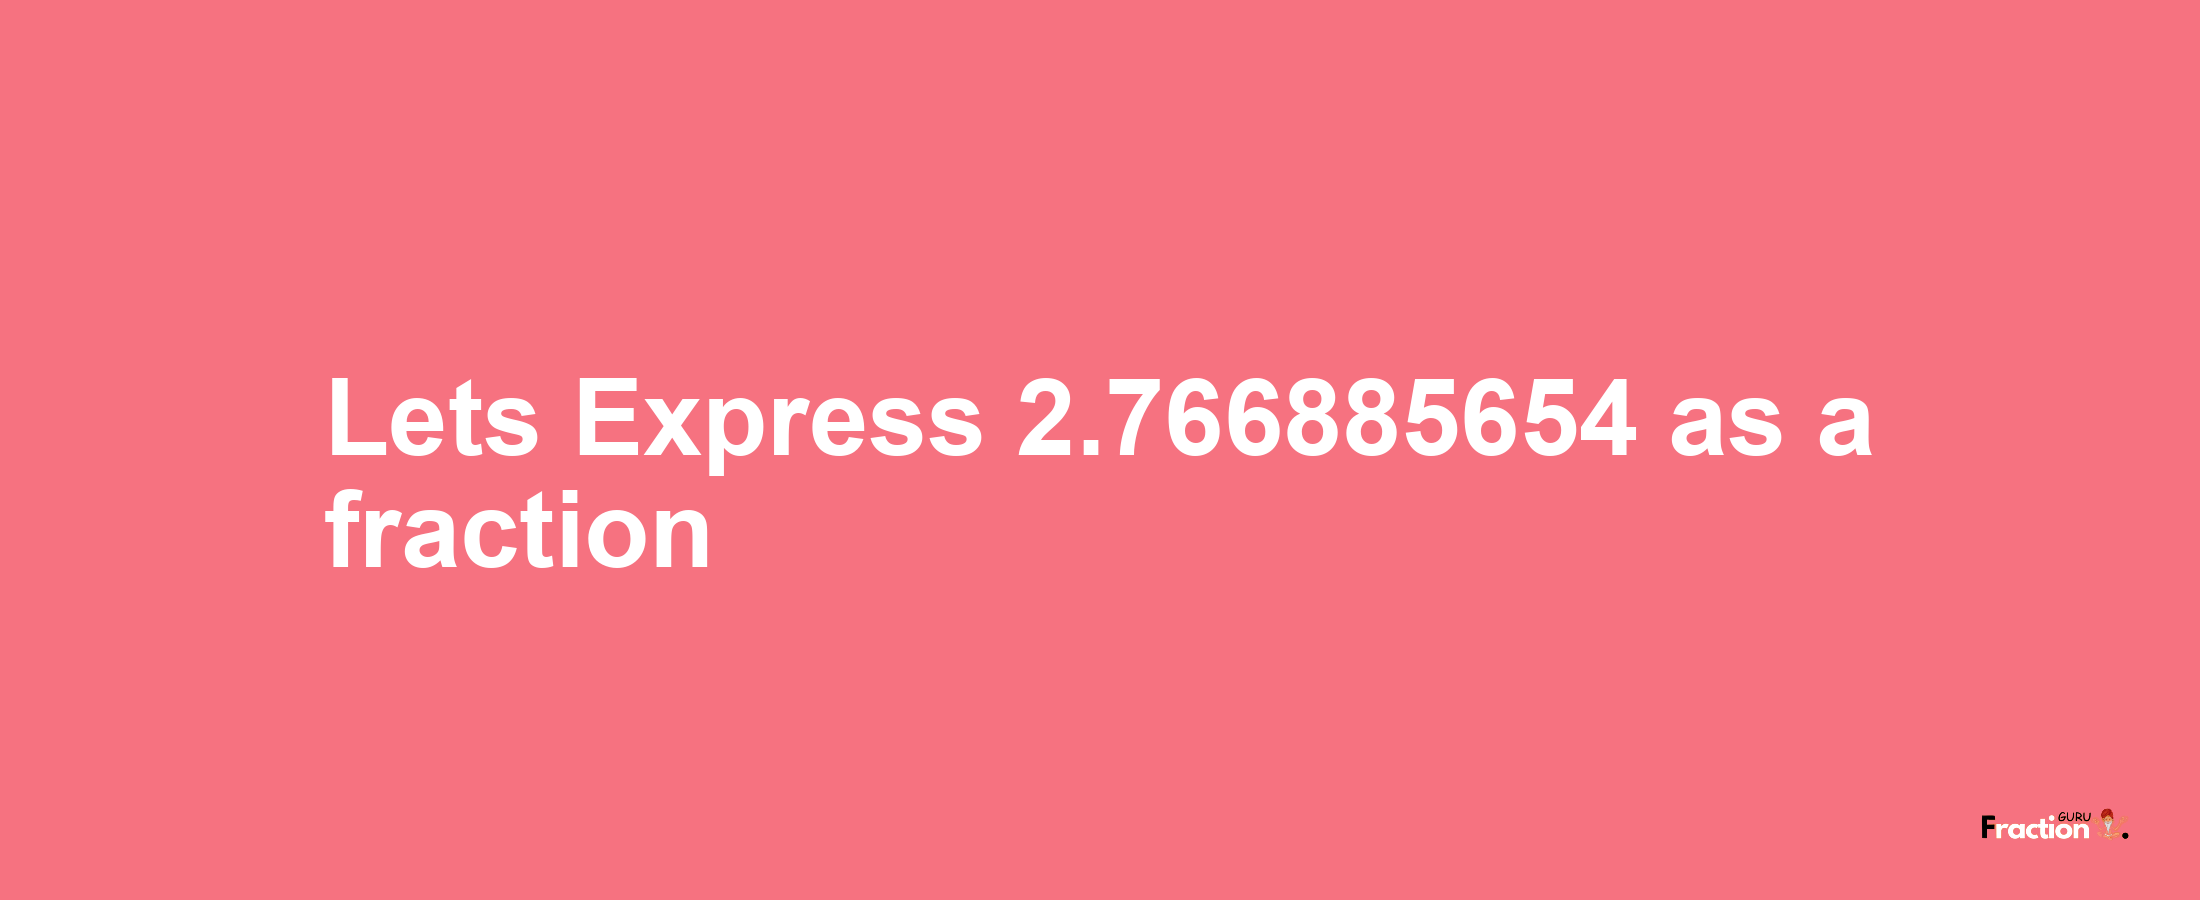 Lets Express 2.766885654 as afraction